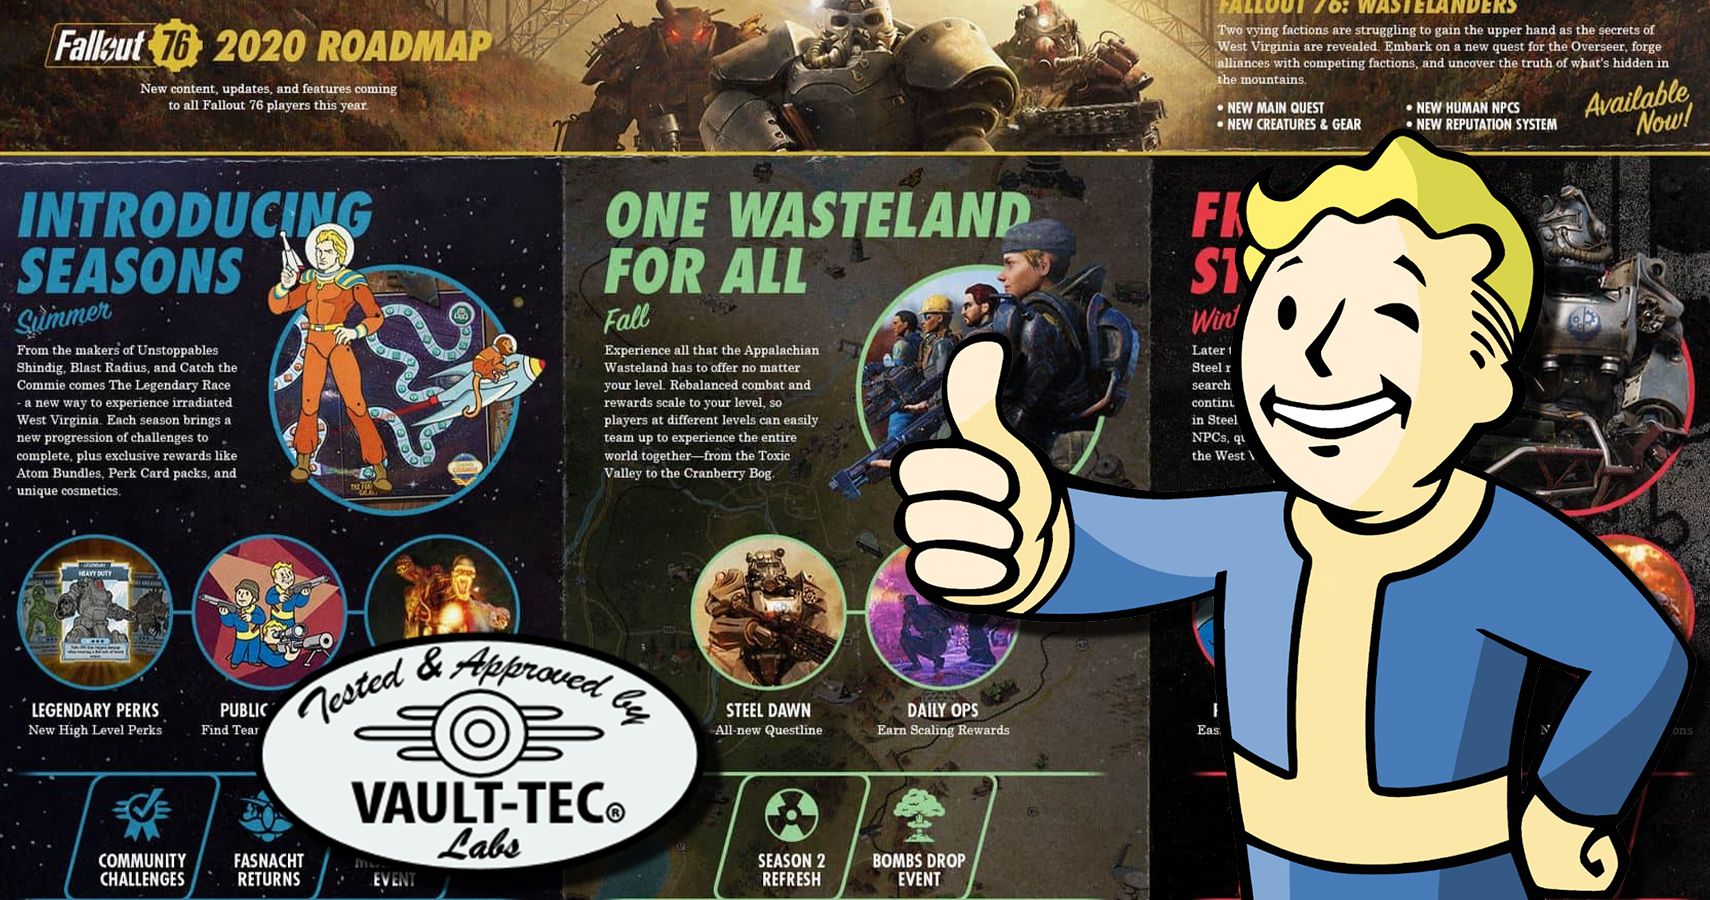 Fallout 76 'One Wasteland' Will Let You Play Anywhere With Anyone